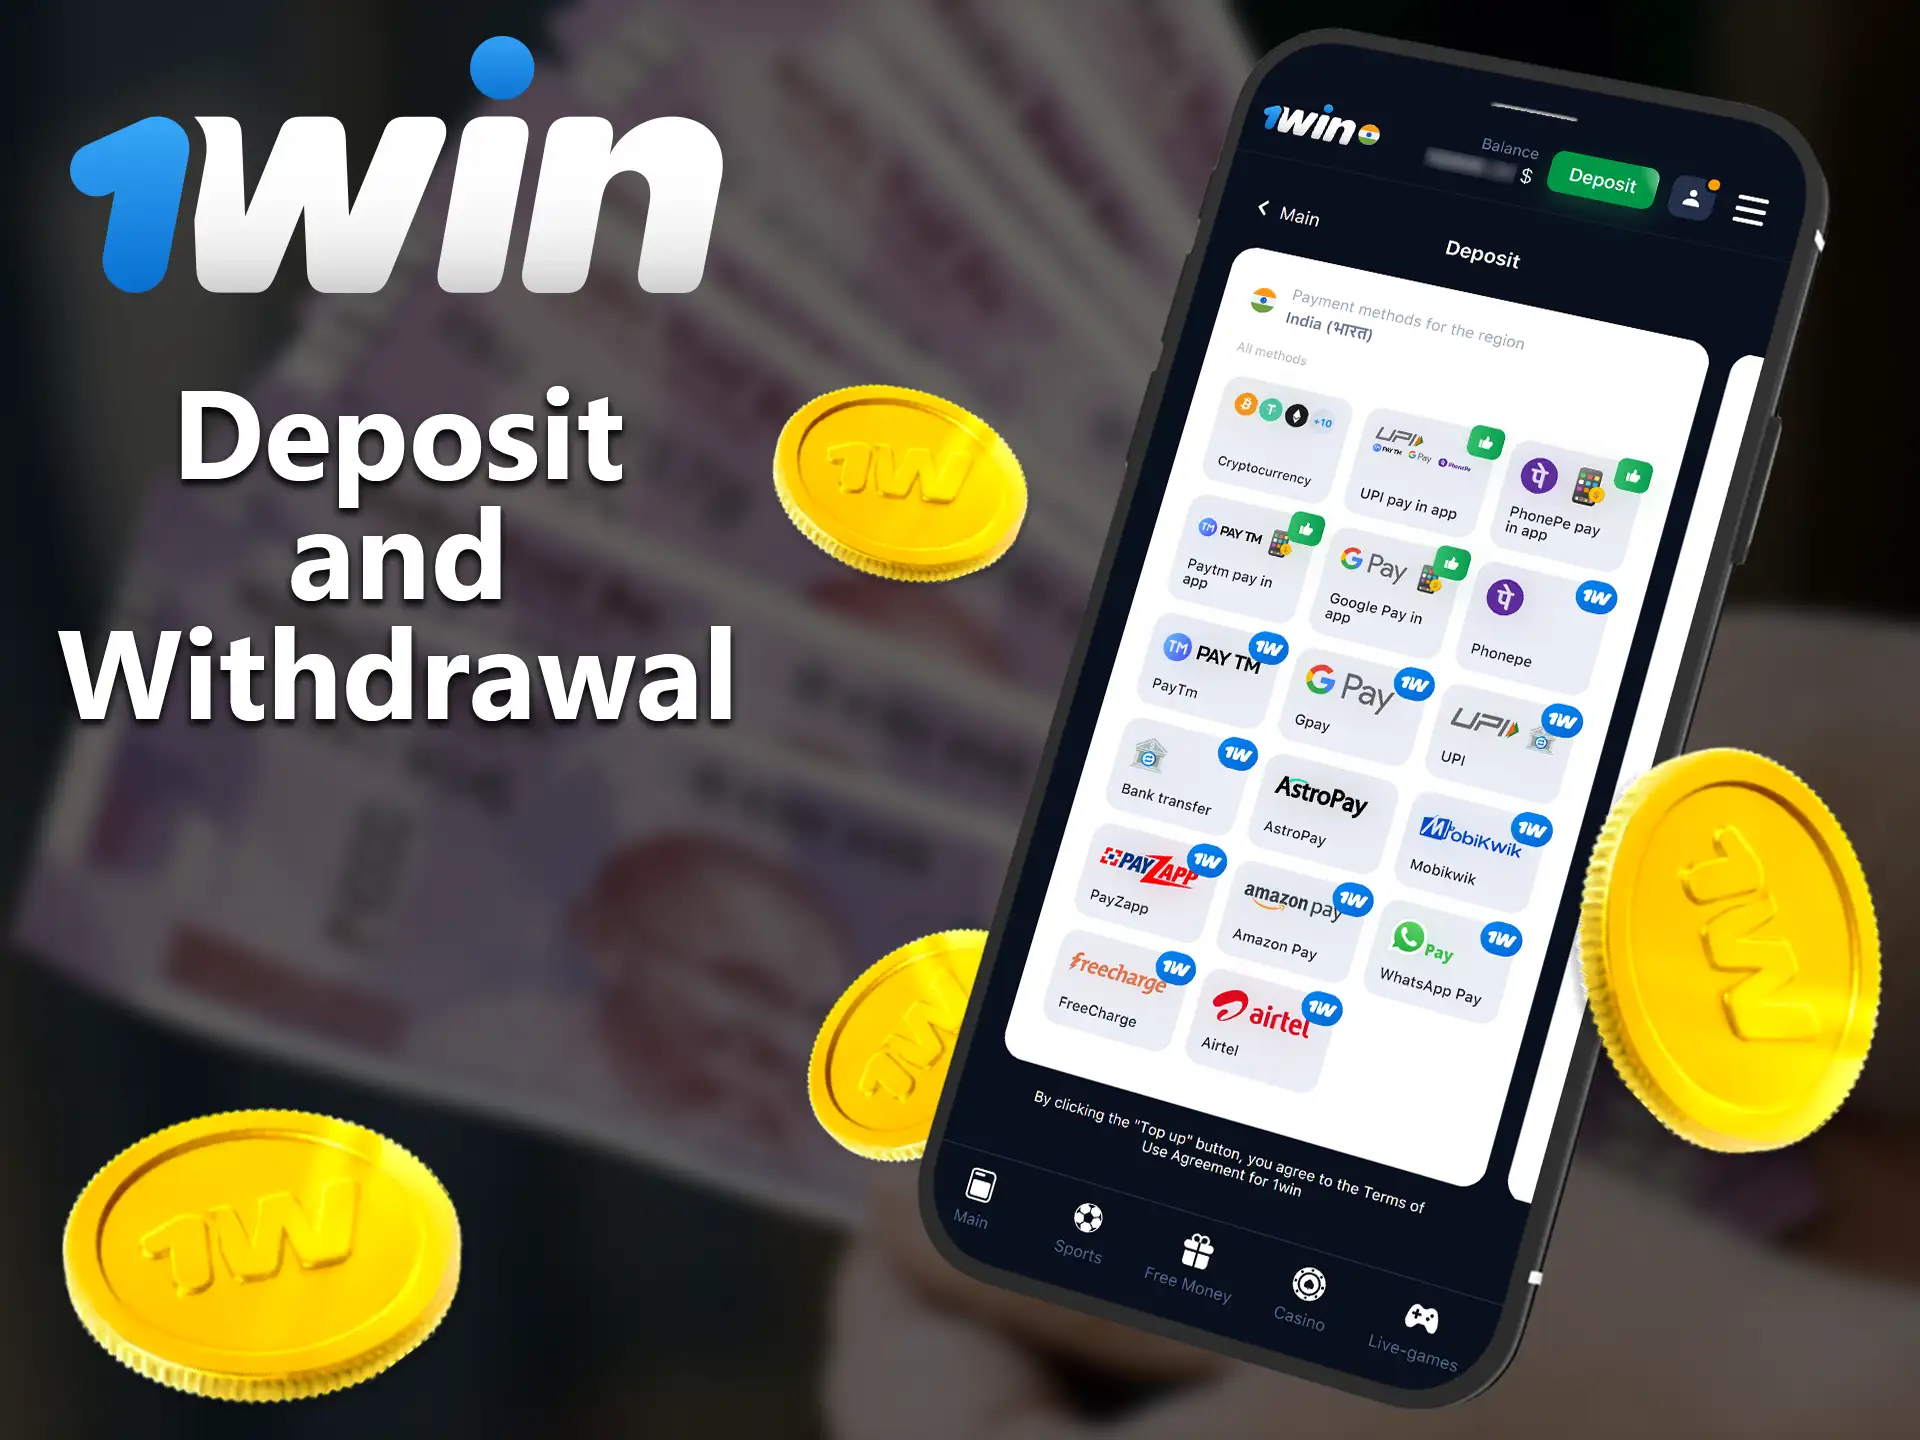 Deposit and withdraw funds directly on the go using the 1Win app for Android and iOS.